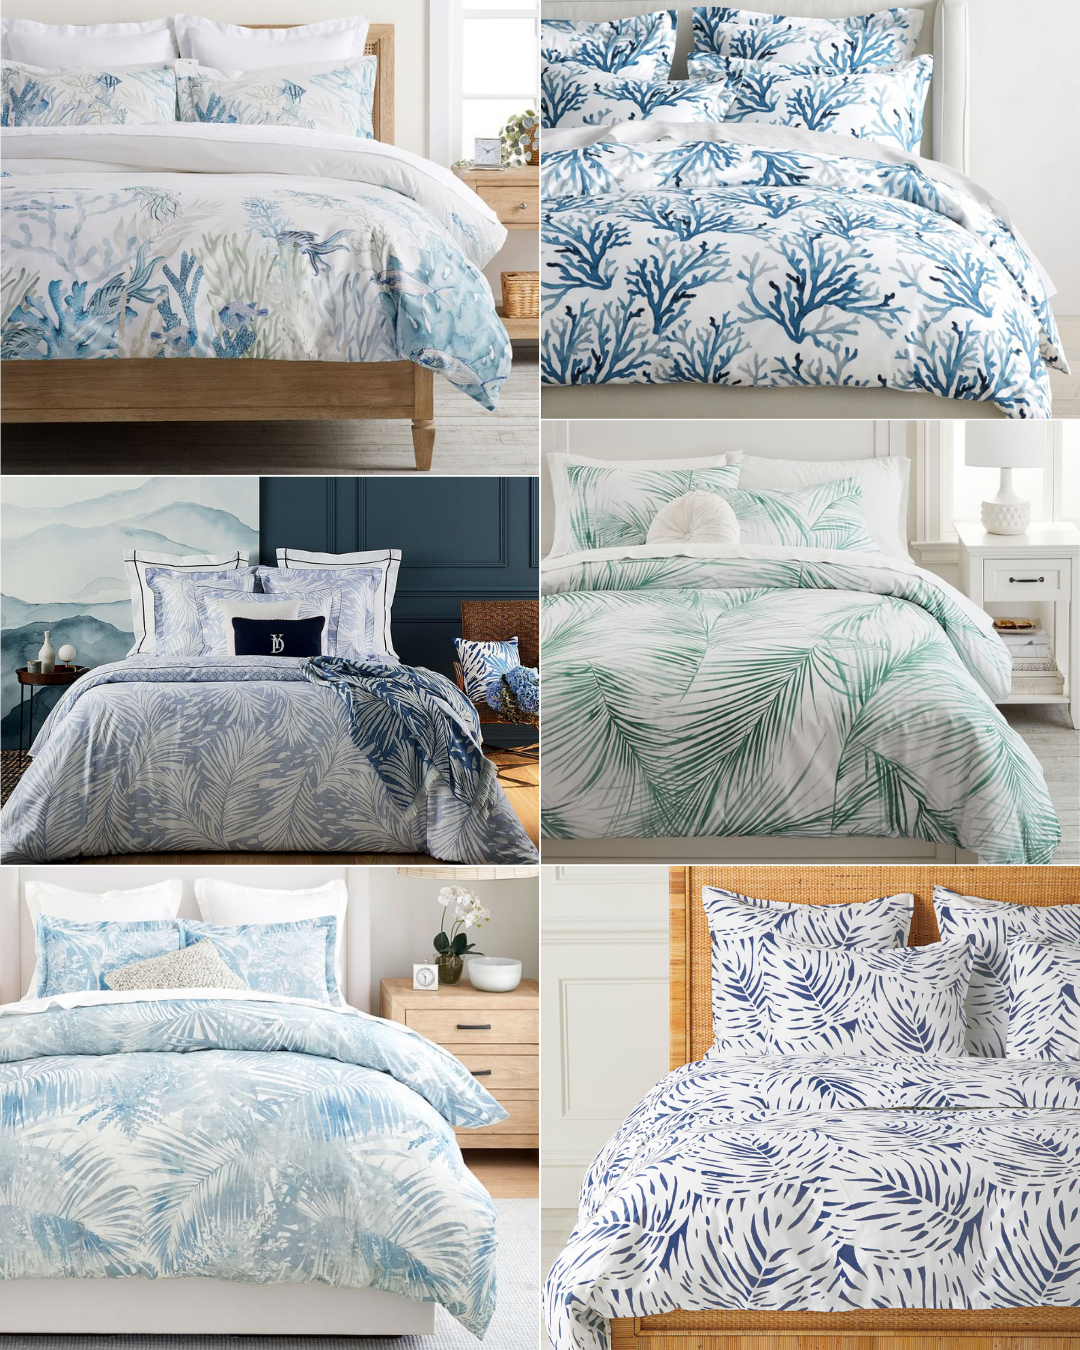 I moved to Florida and I am seriously considering tropical printed sheets and duvet covers! Here is a round up of some favorites!